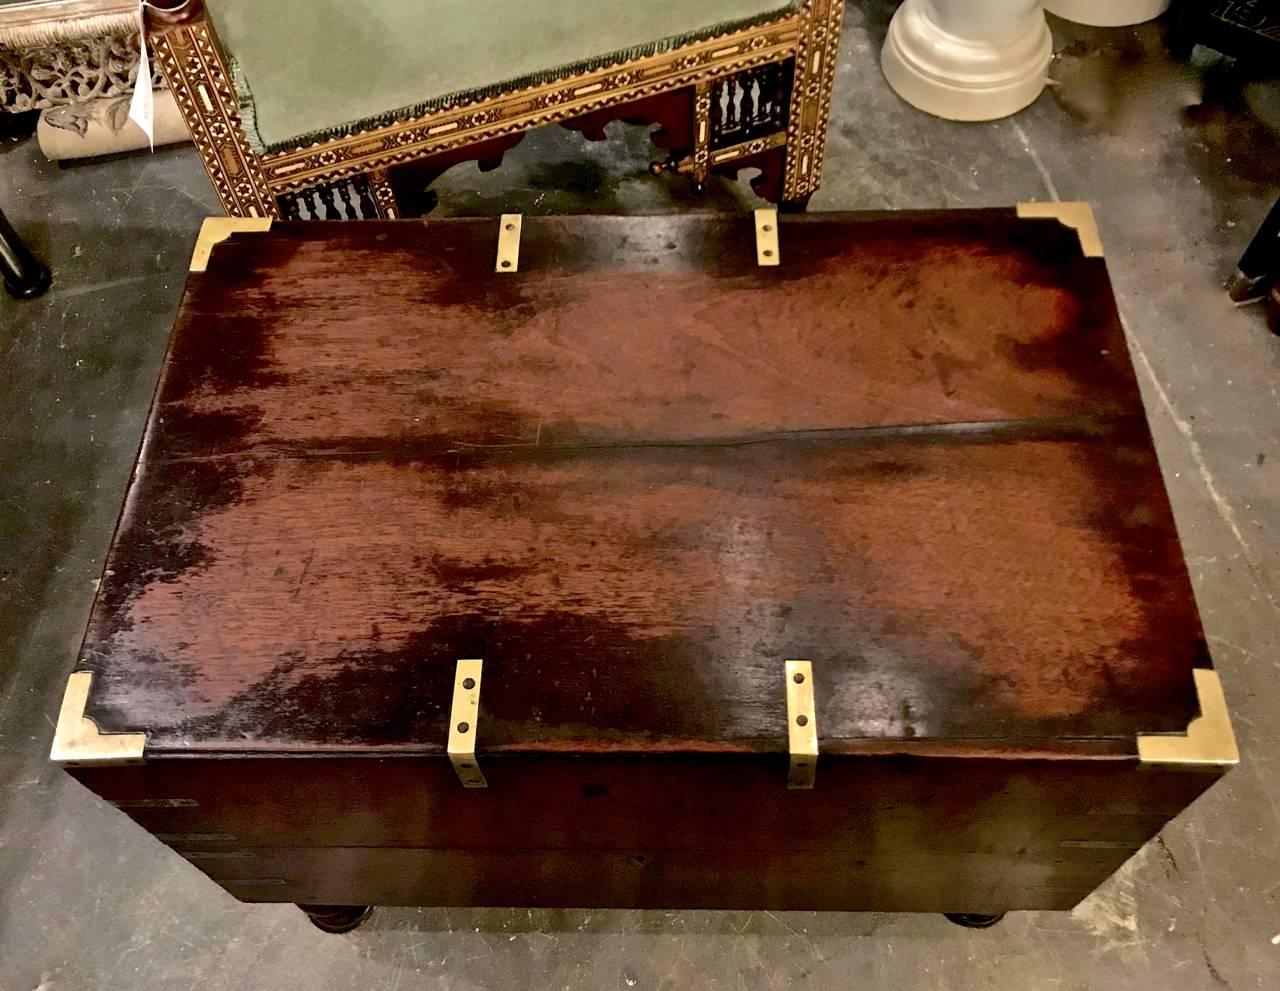 This is an unusual example of an early 19th century. English officer's campaign chest or trunk. The trunk retains its original finish, feet and brass fittings. It appears that the interior was fitted with dividers at some point. The chest is in very